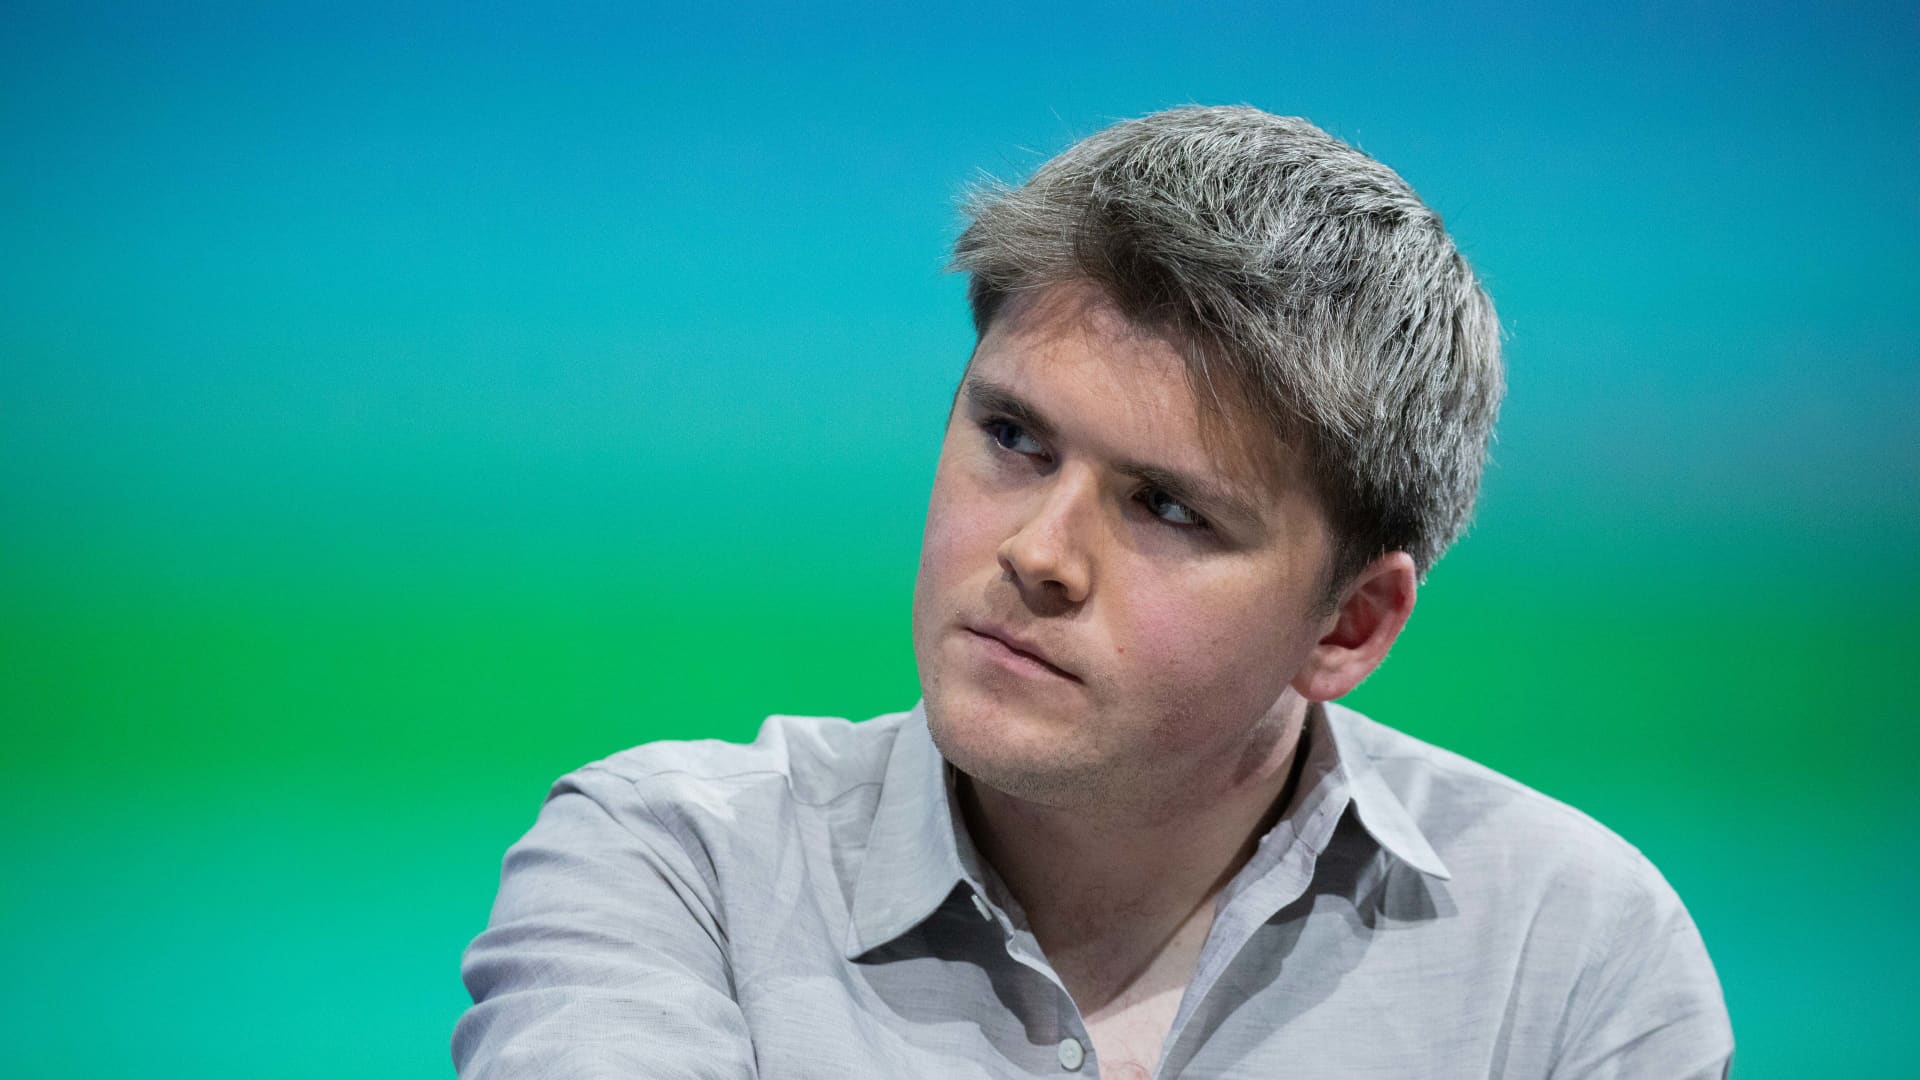 Stripe co-founder says high interest rates flushed out Silicon Valley's 'wackiest' ideas